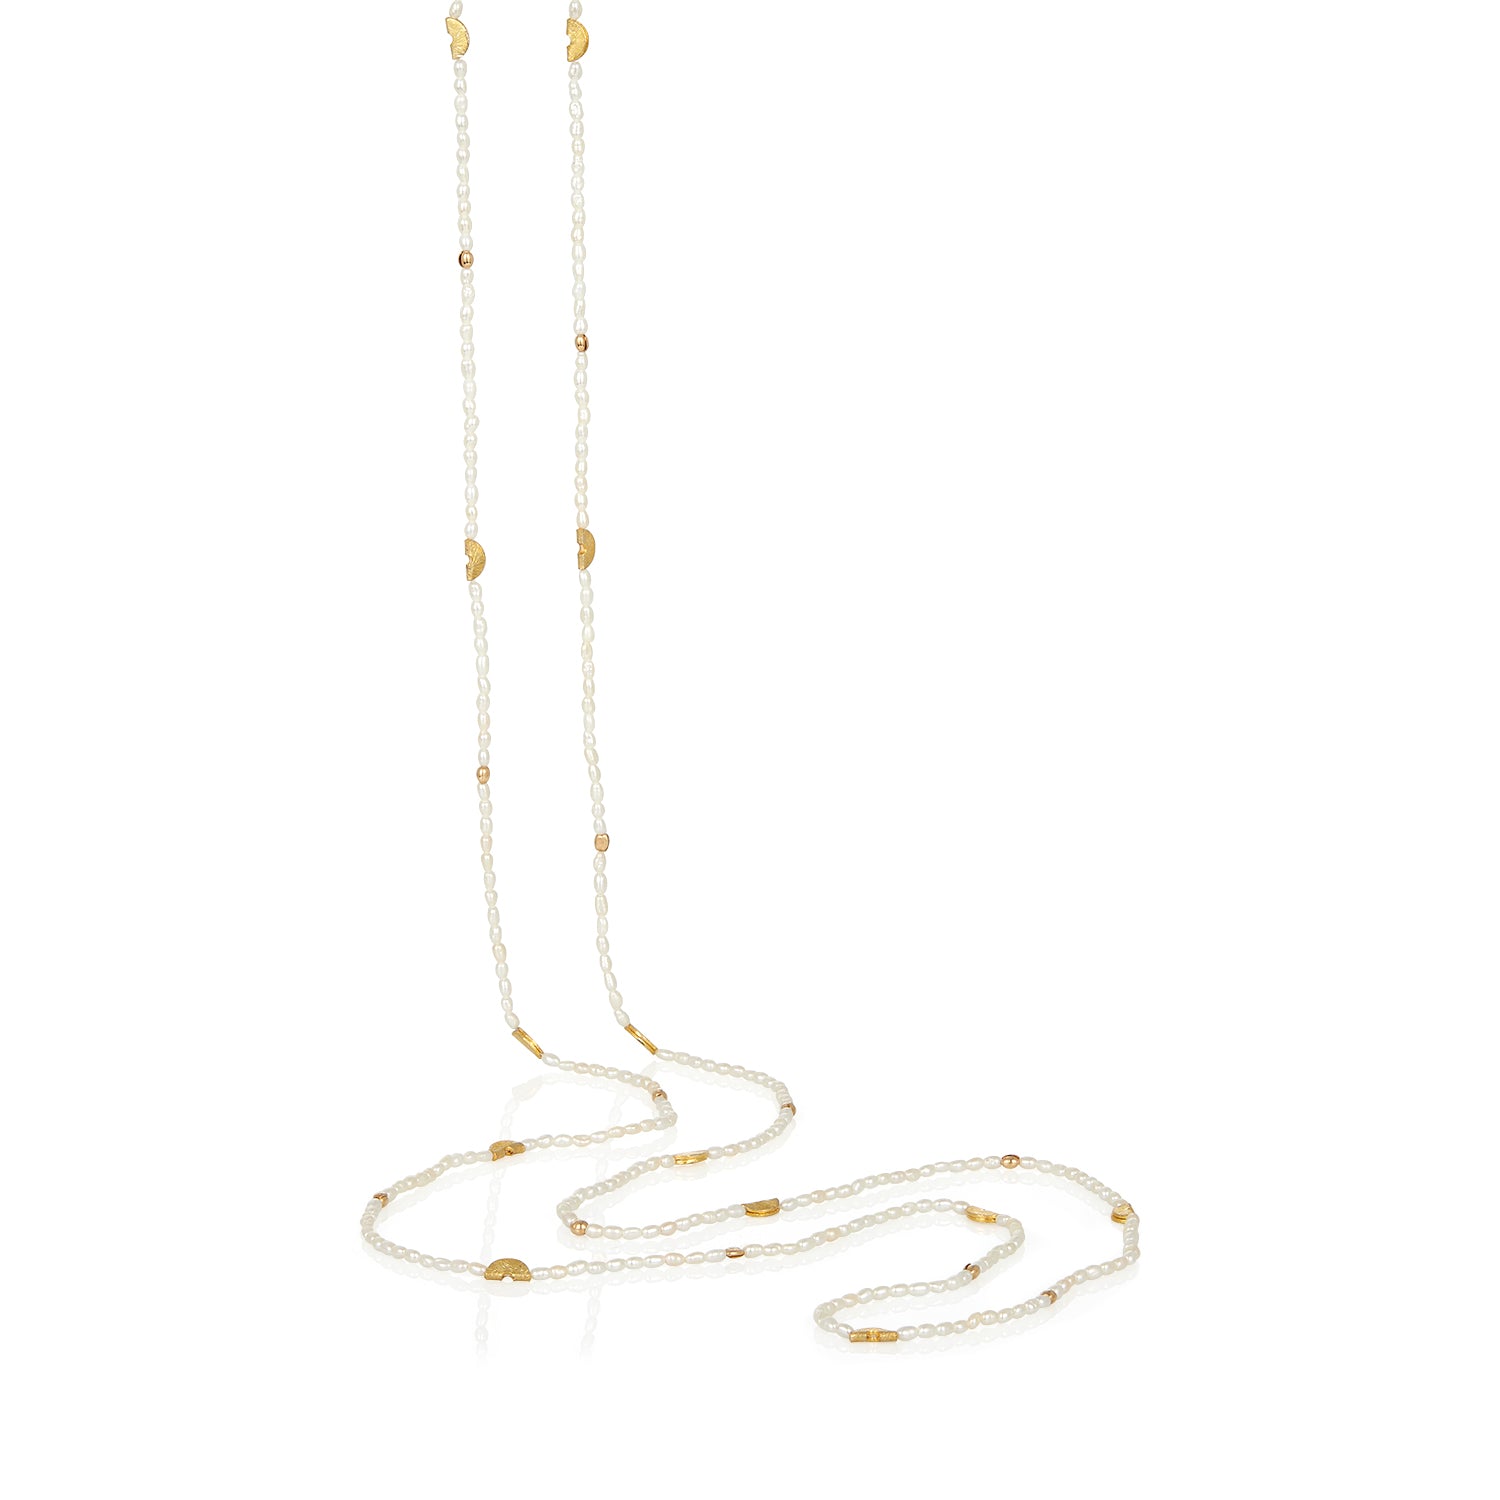 Half Moon Long Strand Necklace - Seed pearl